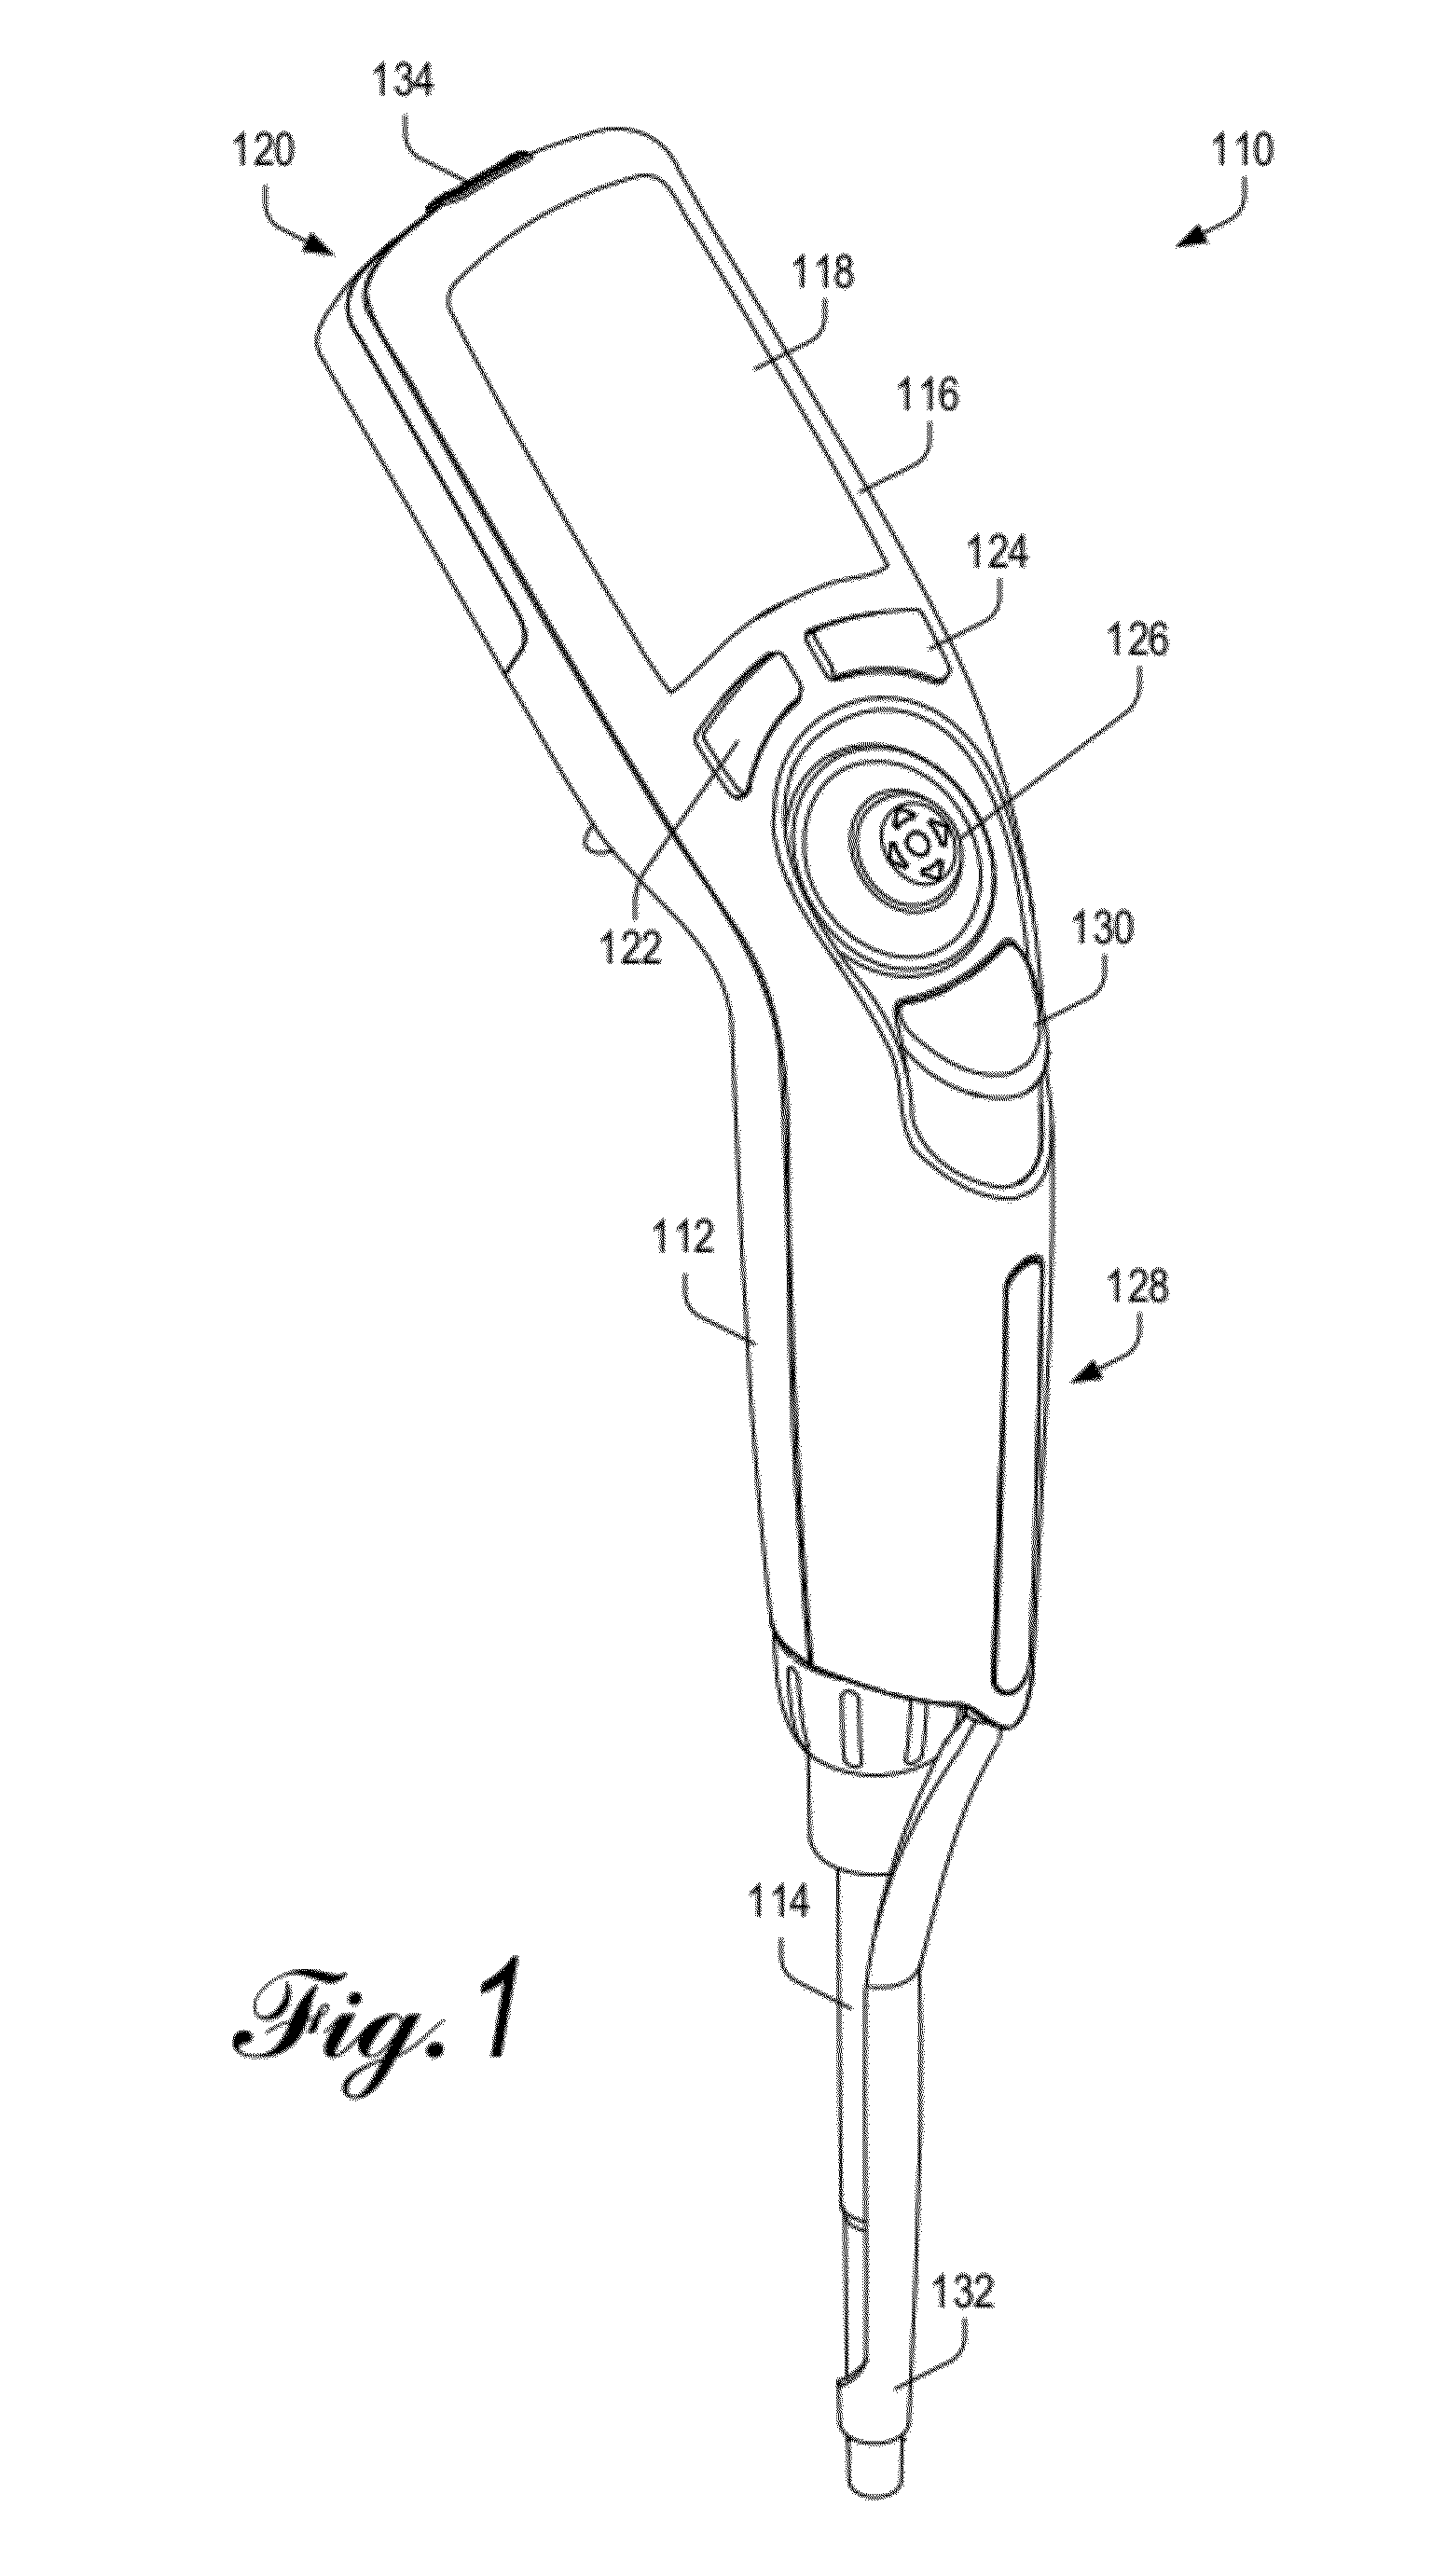 Electronic pipette with two-axis controller